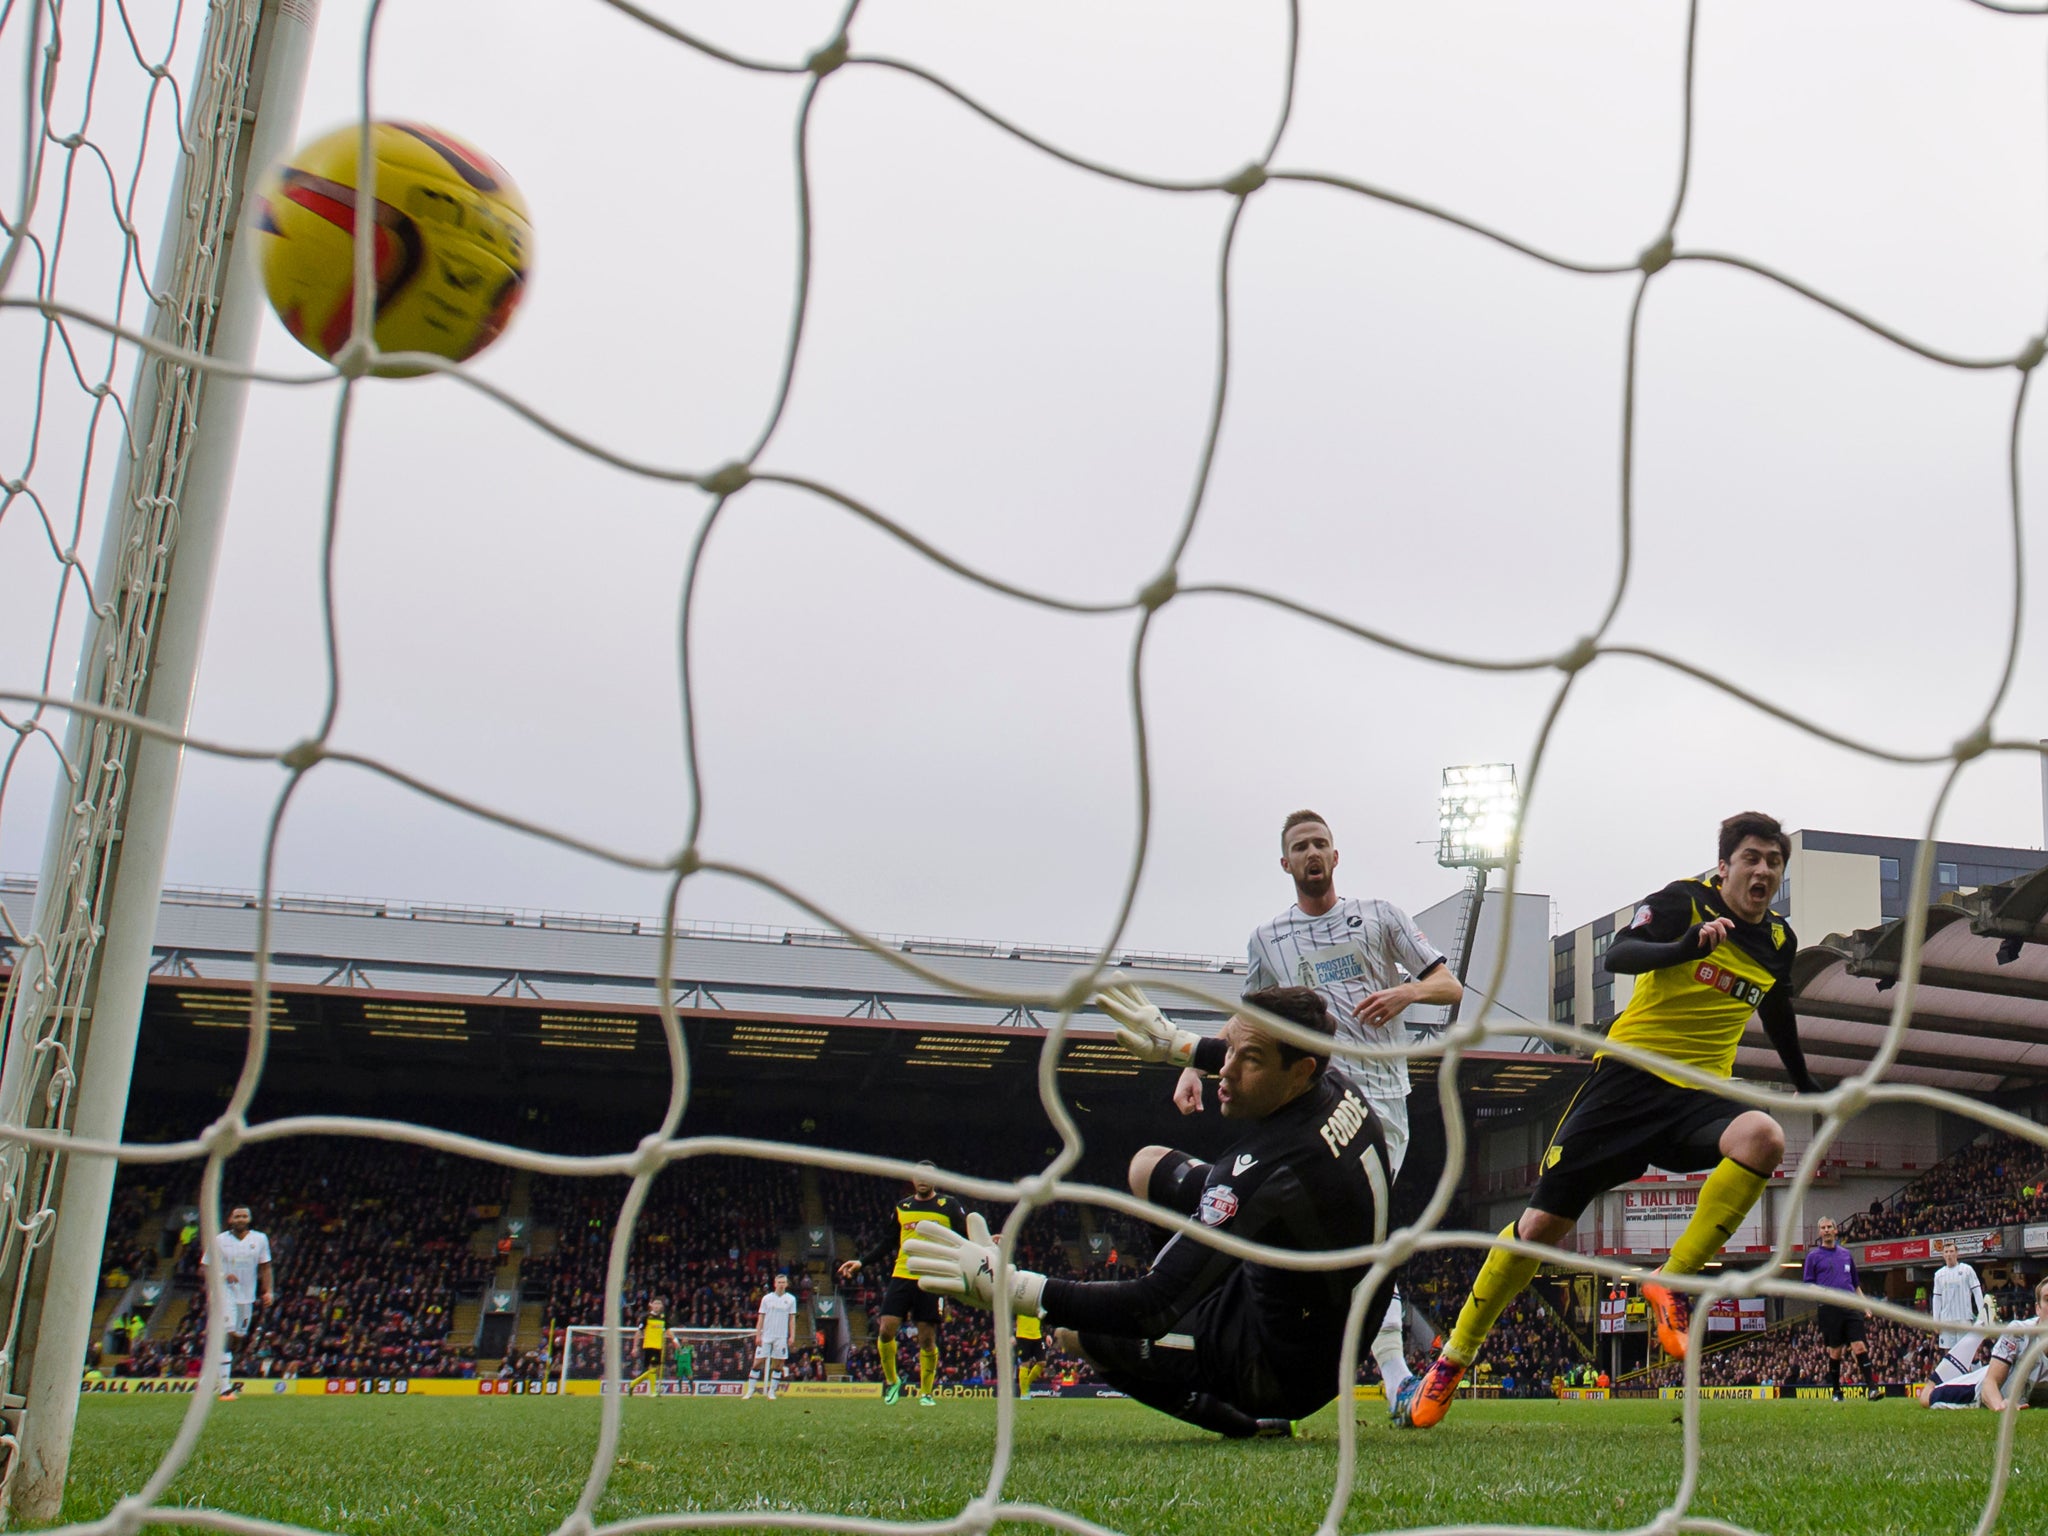 Fernando Forestieri scores for Watford in their 4-0 win over Millwall